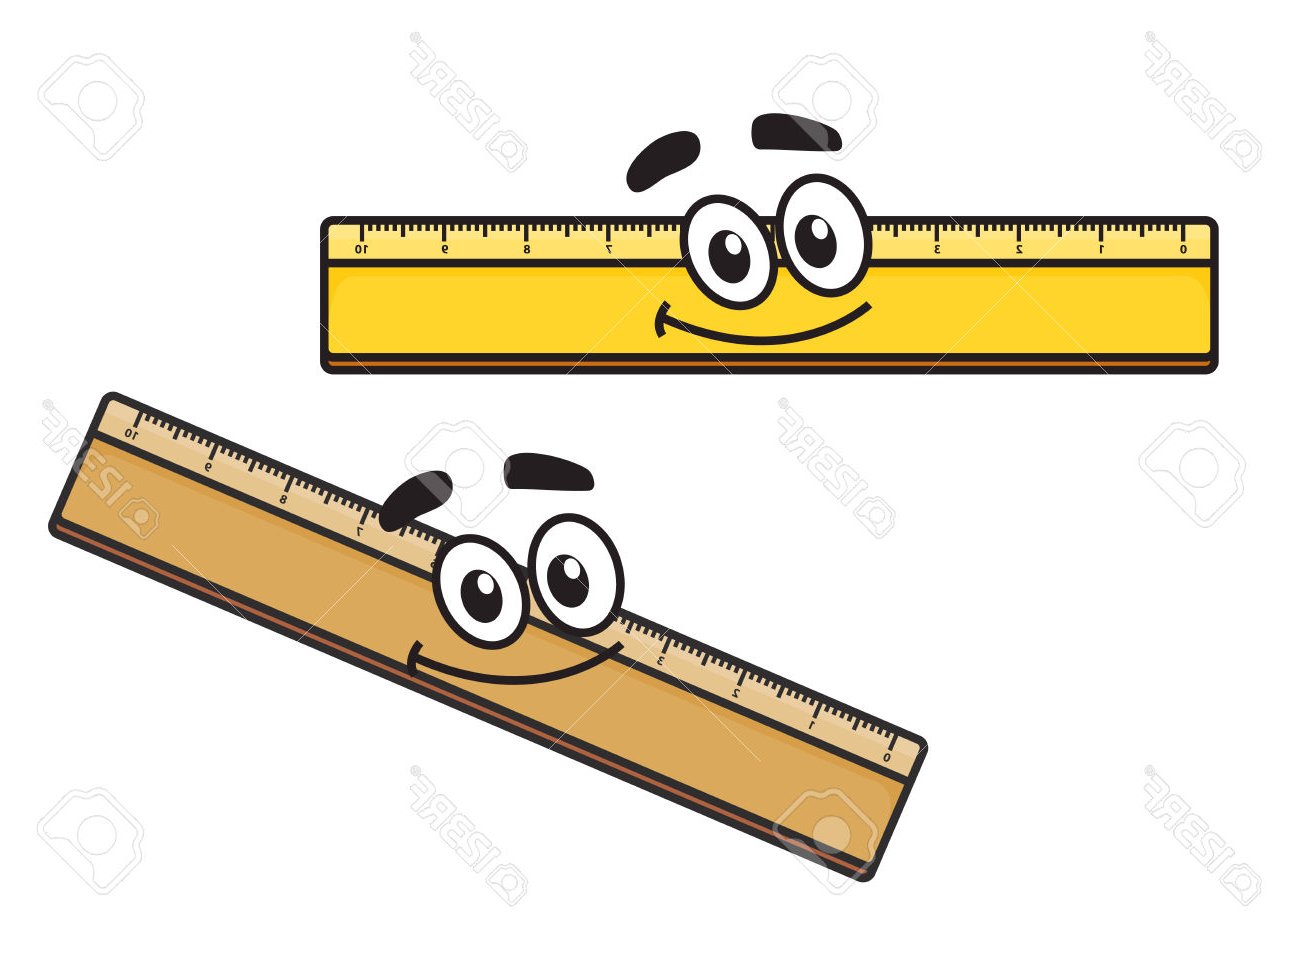 Cliparts x making the. Ruler clipart cute